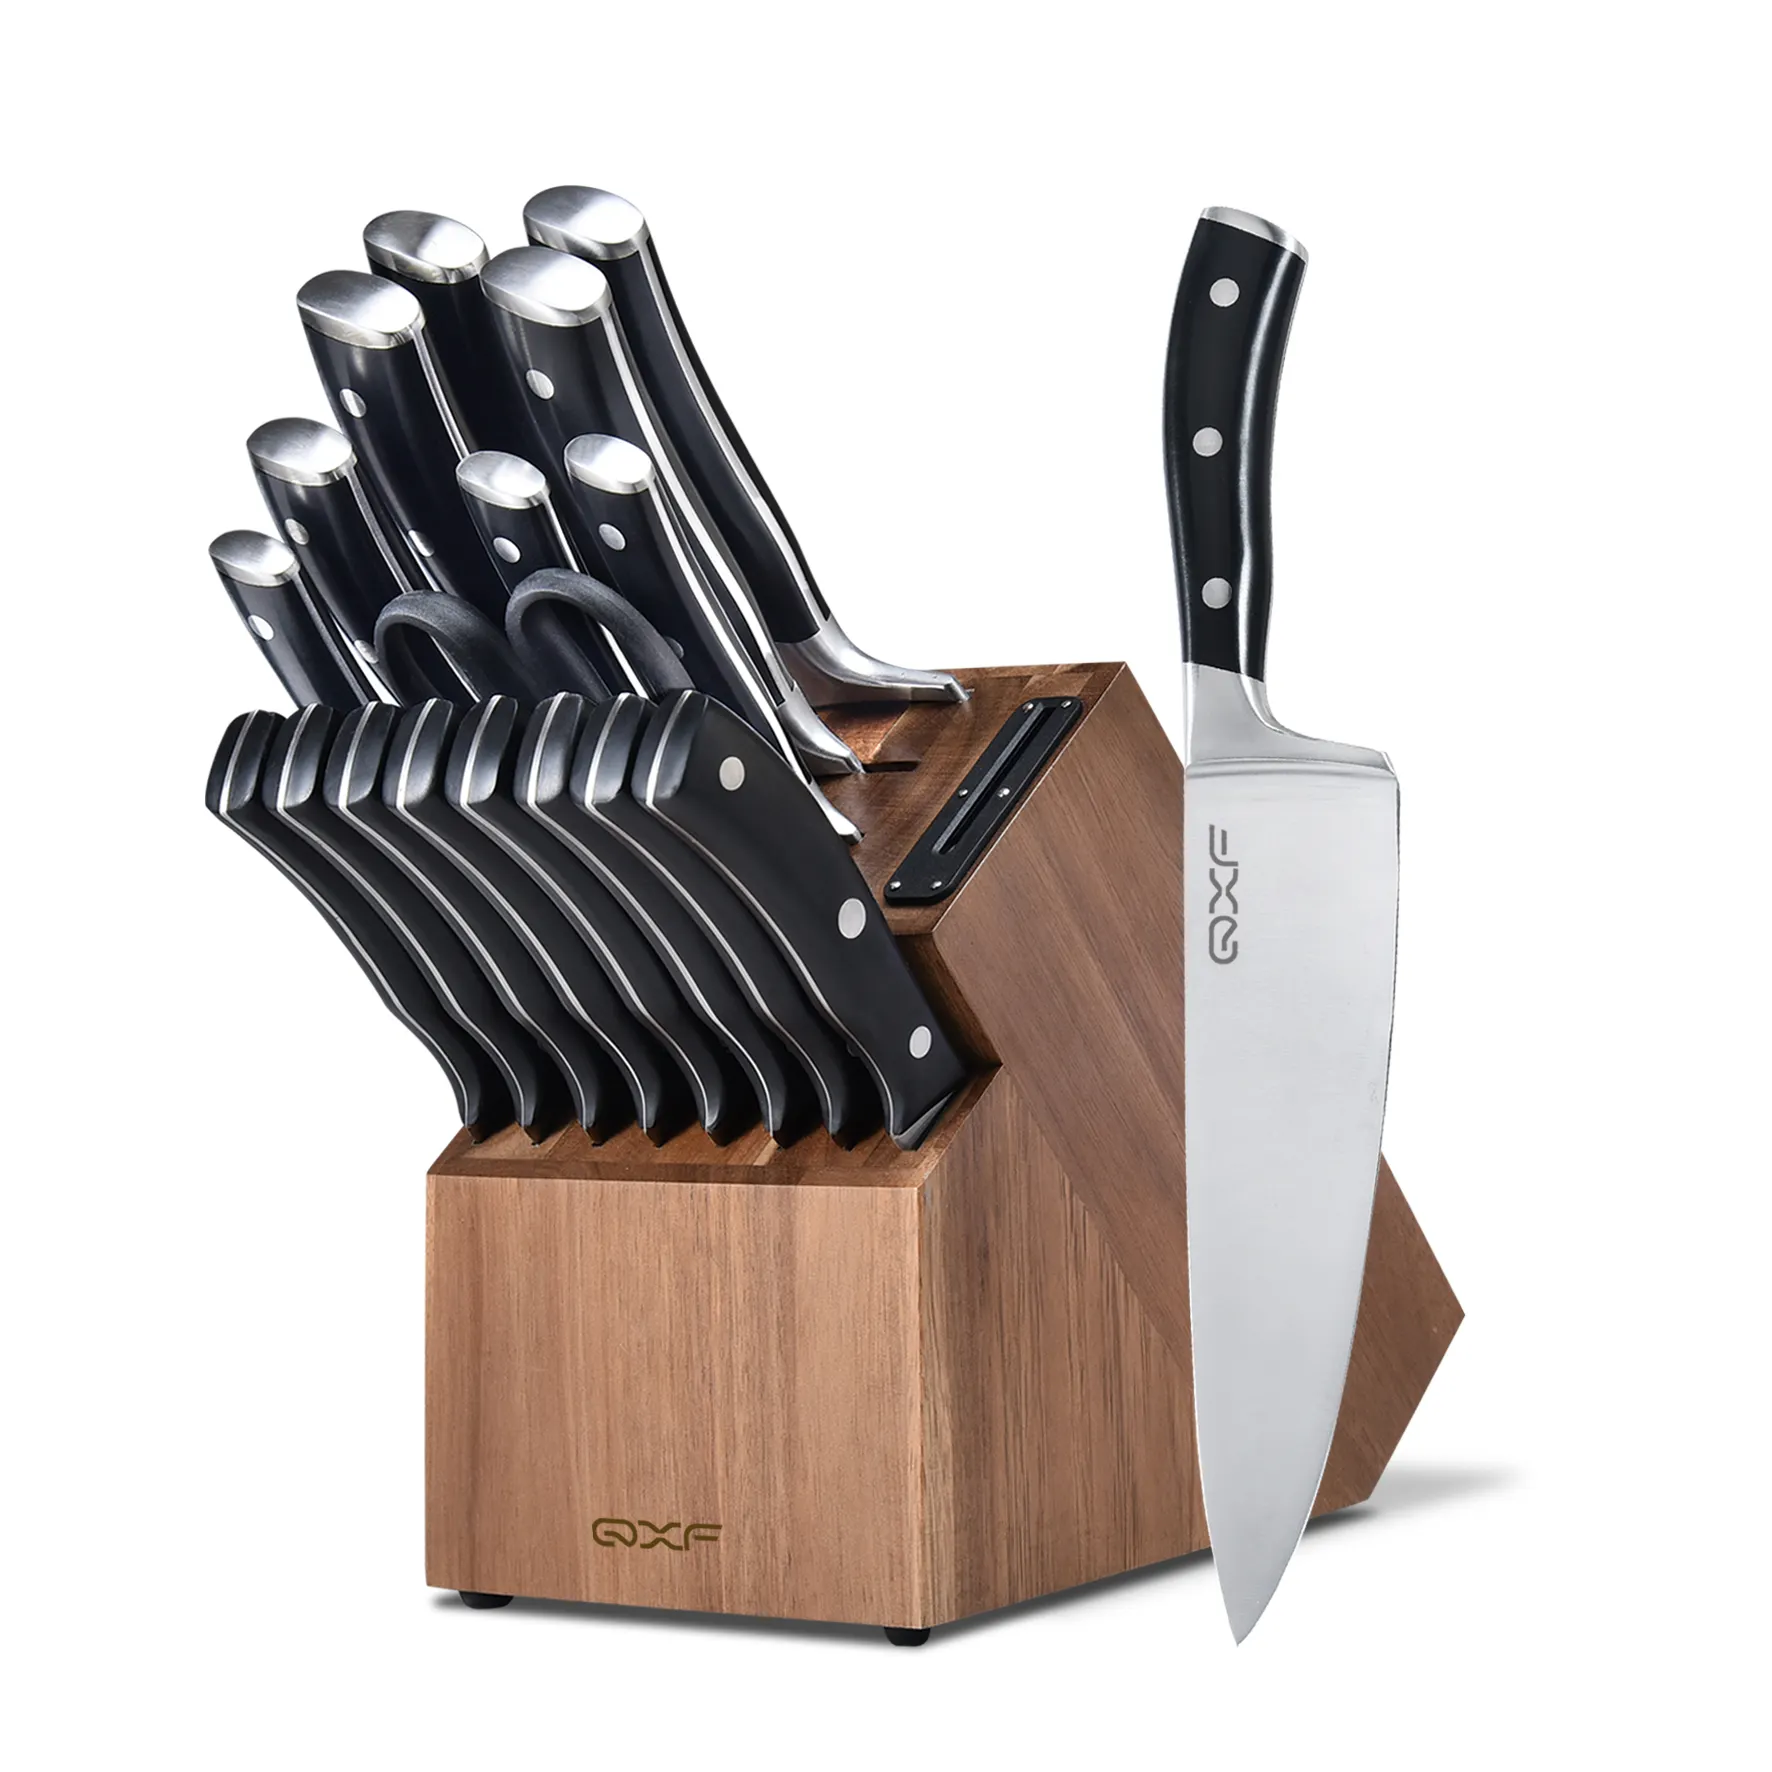 High Carbon German Stainless Steel 18 PCS Kitchen Knife Super Sharp Chef Knife Set with Knife Block